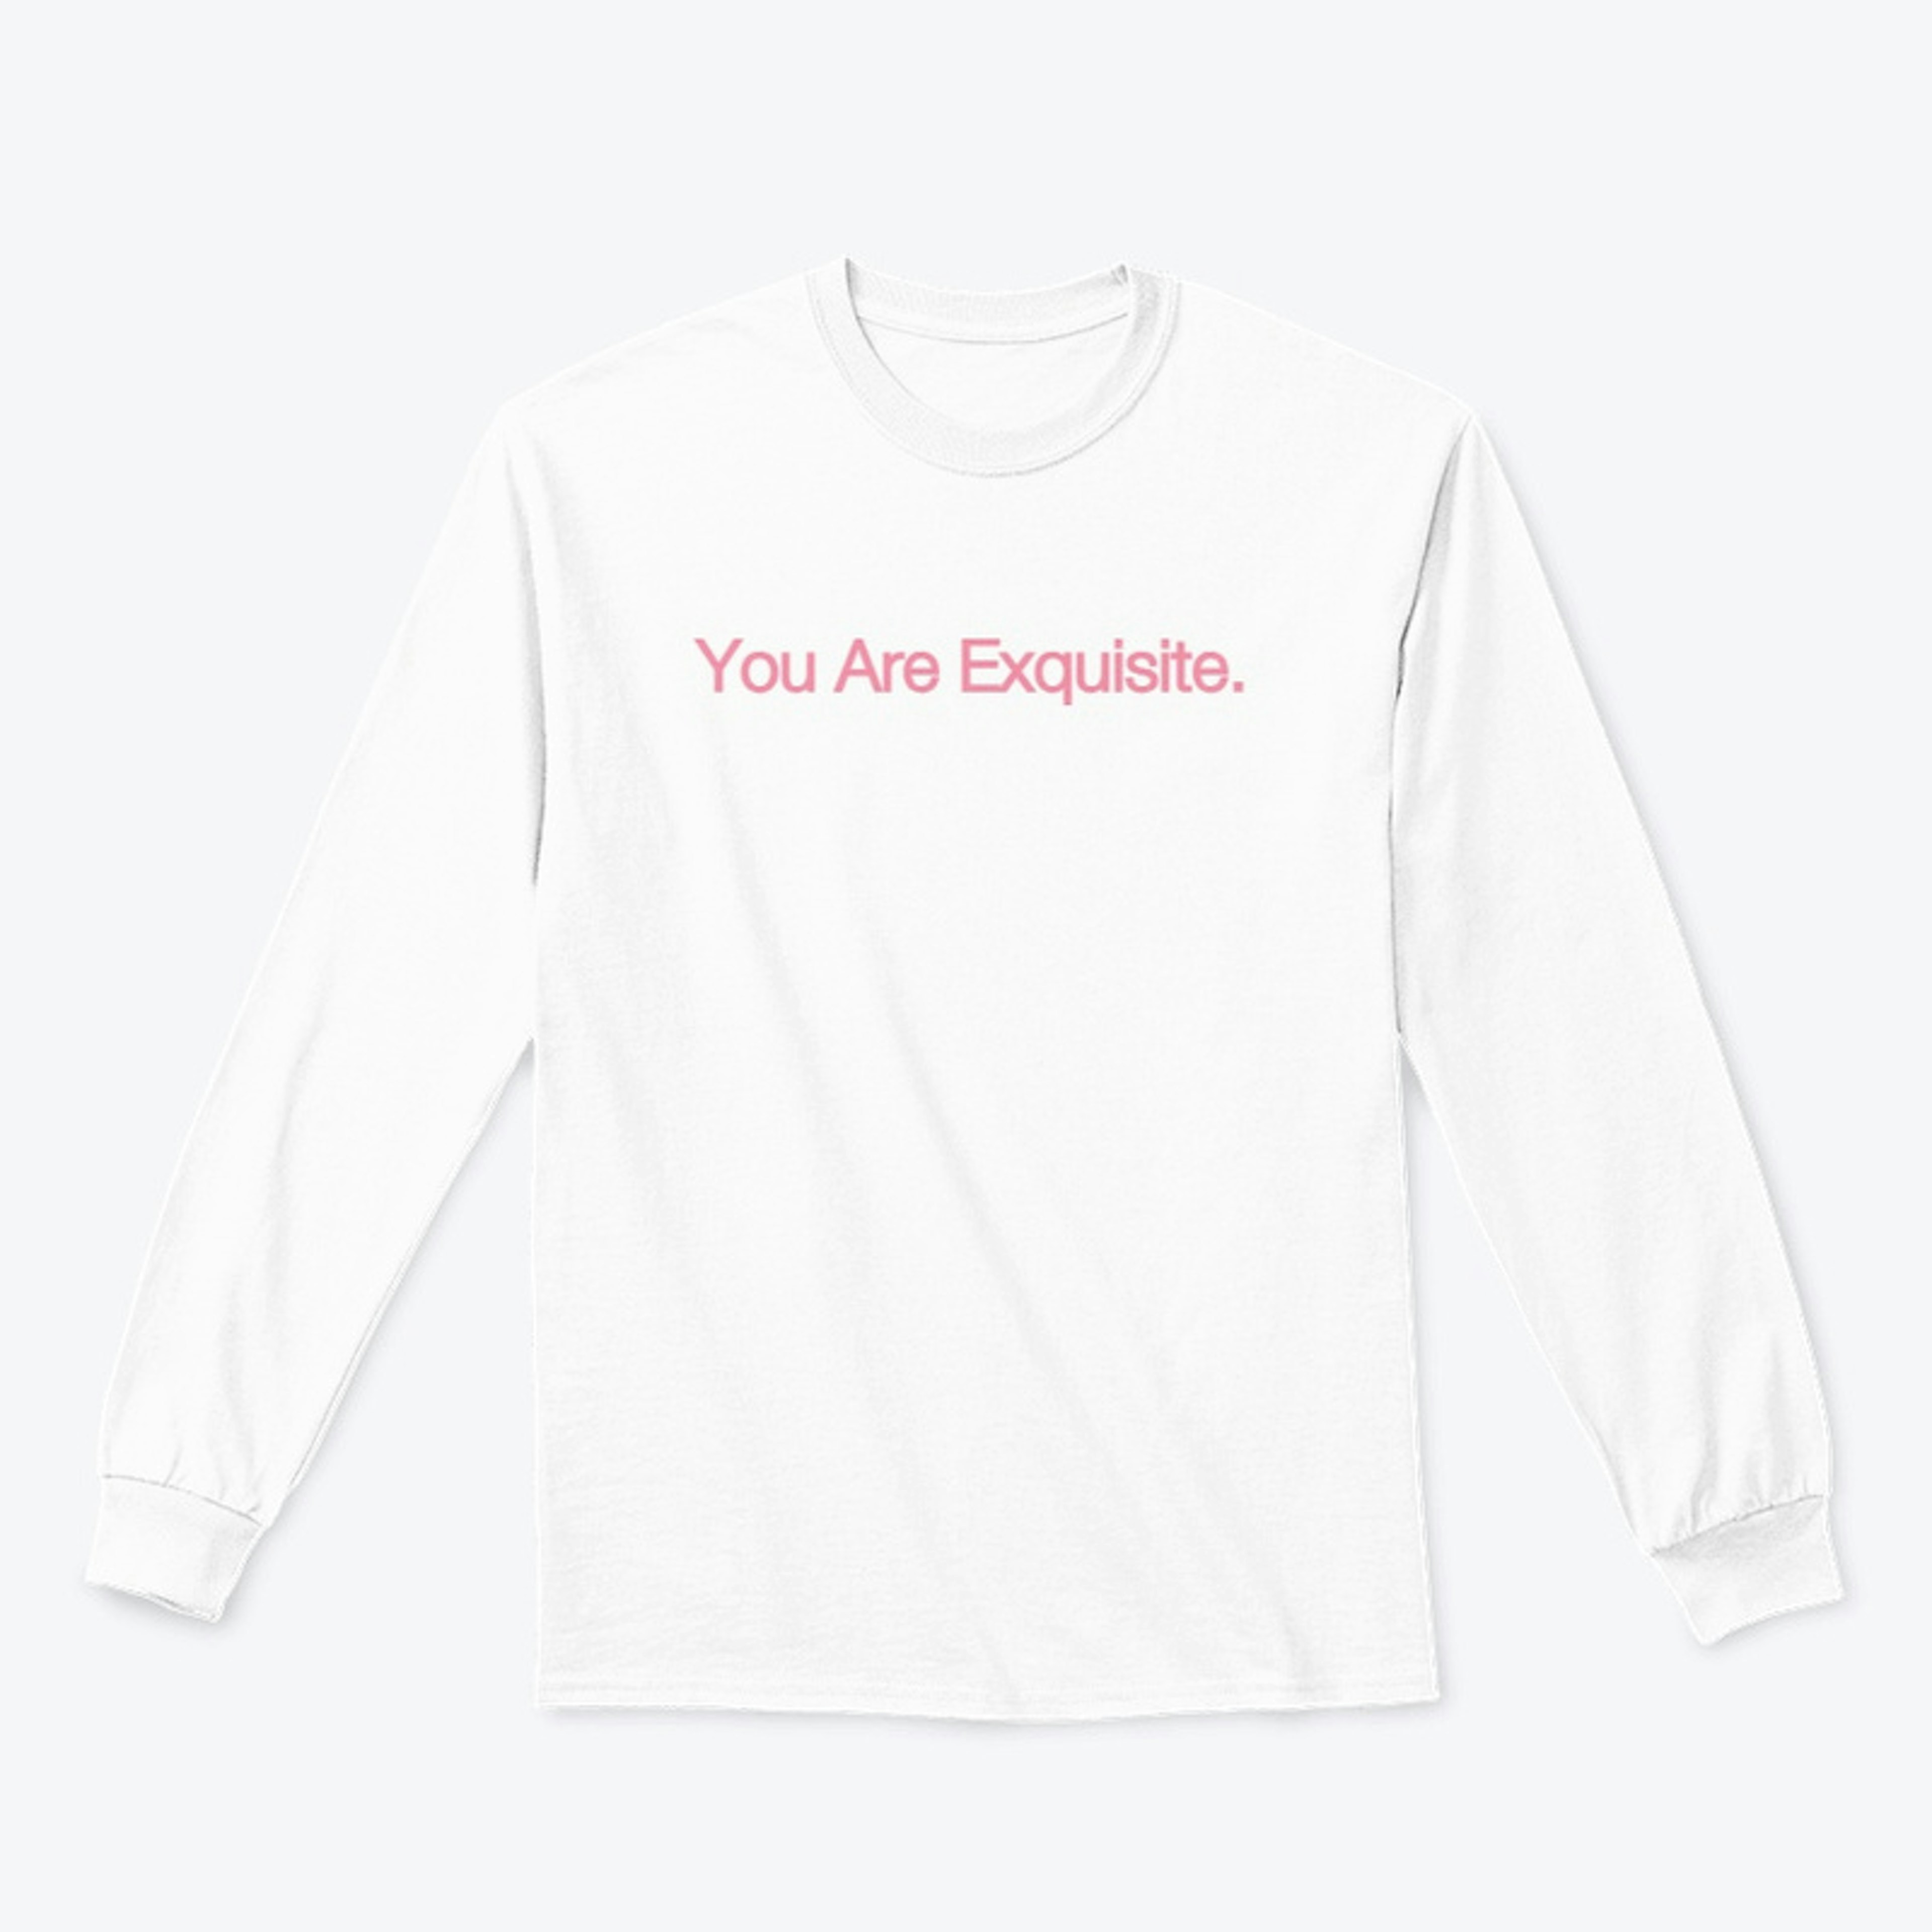 You Are Exquisite.